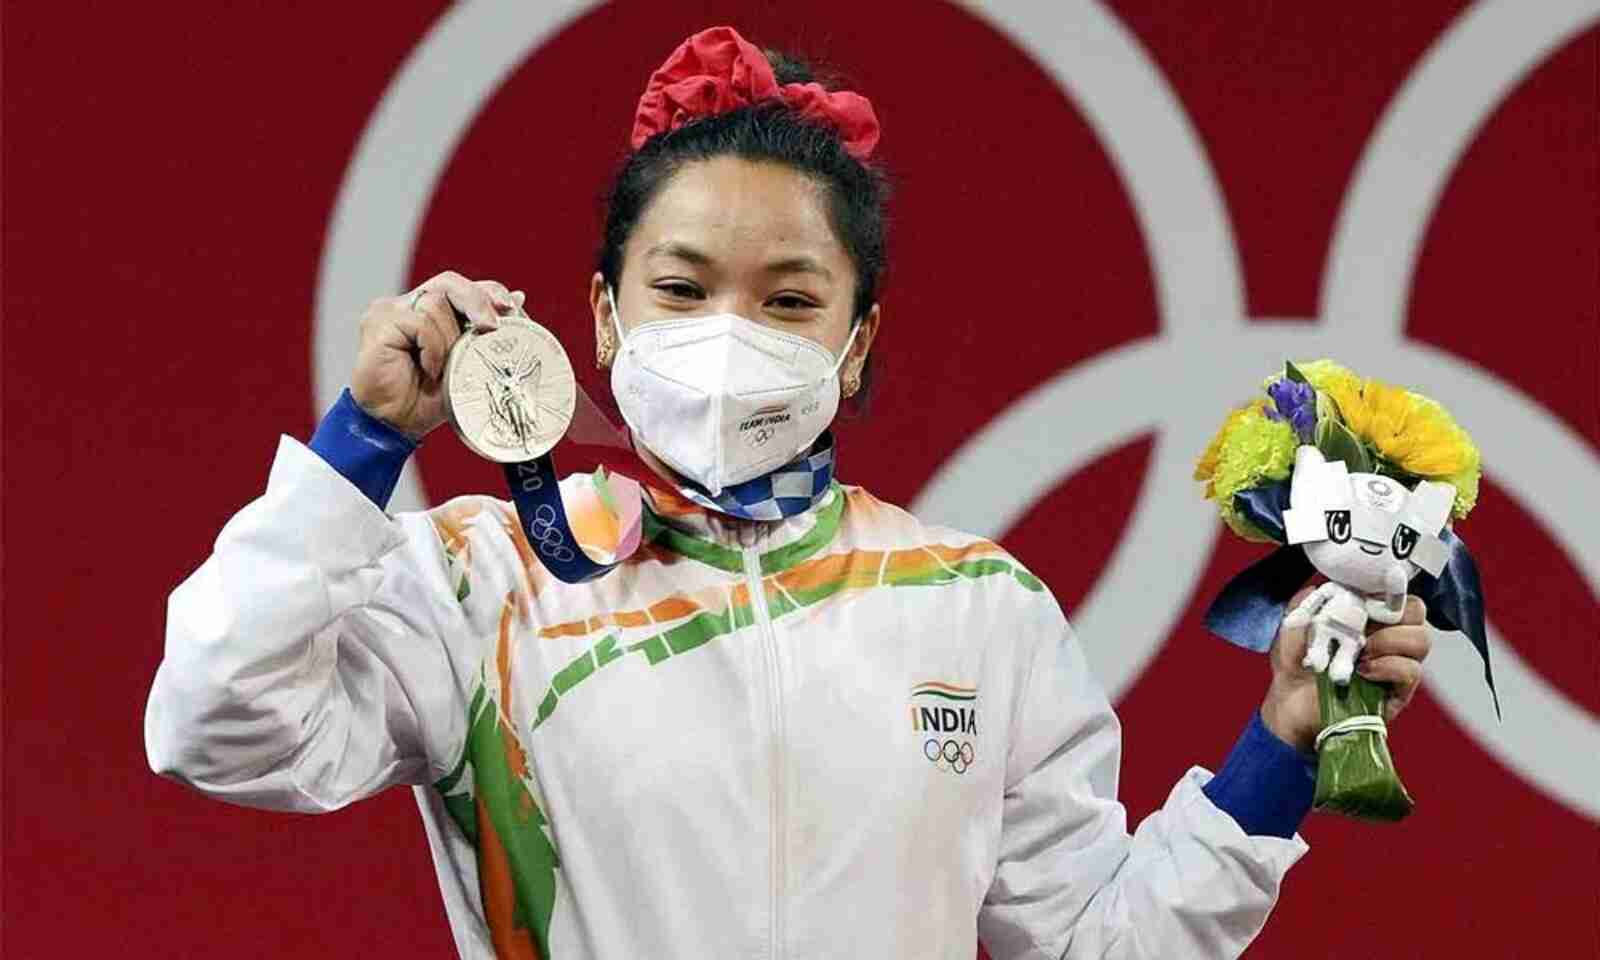 Tokyo Olympics 2020 Was dreaming of this for 5 years, says Mirabai Chanu after historic silver medal